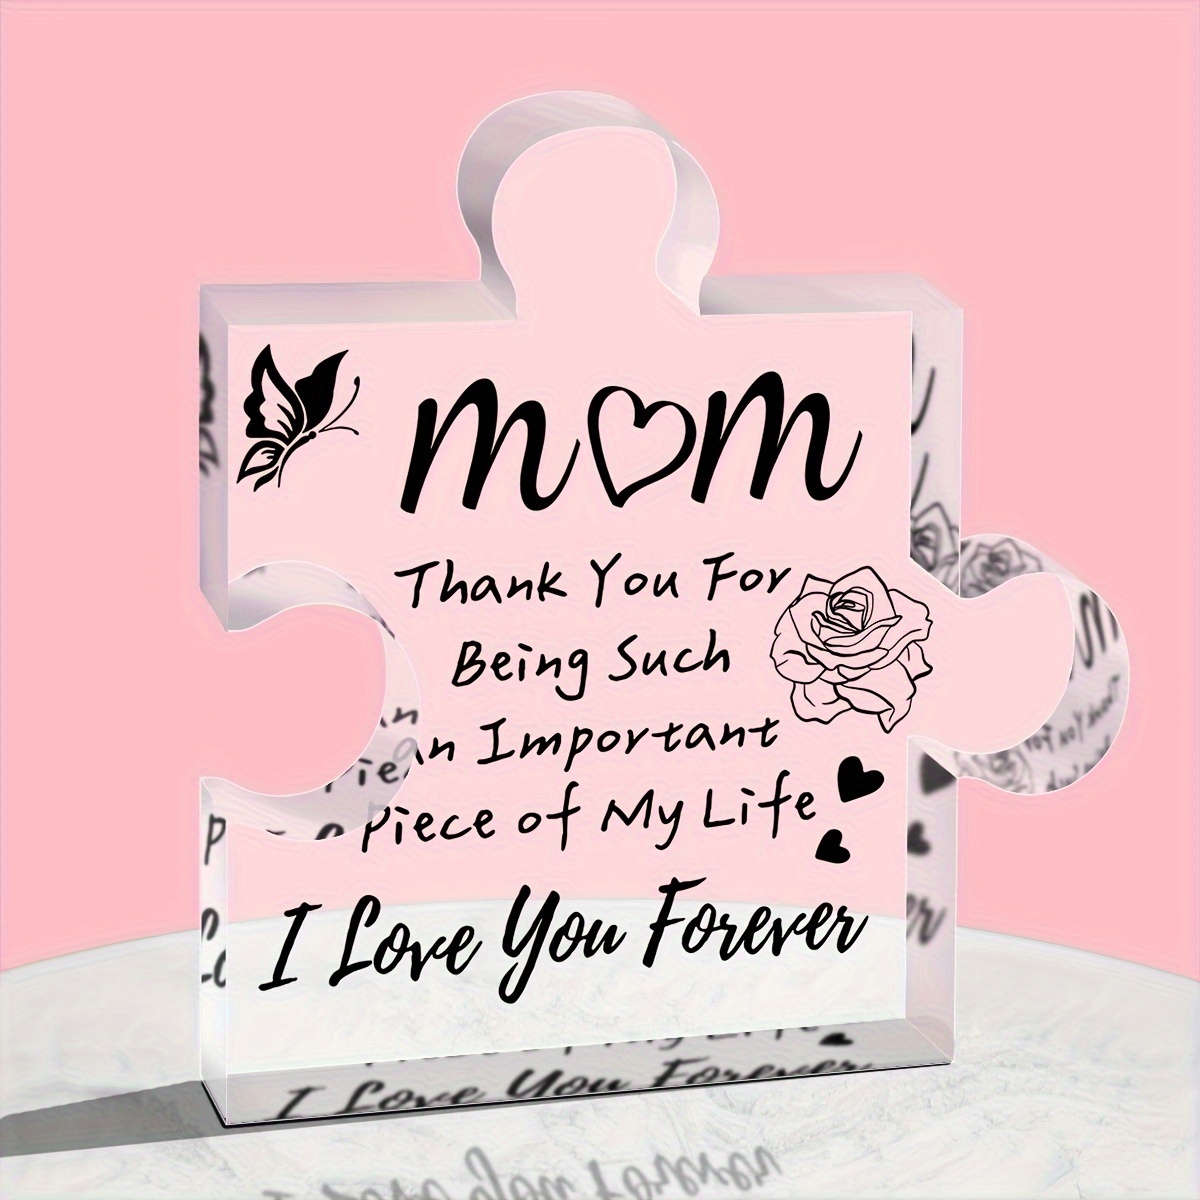 VELENTI Birthday Gifts for Mom - Engraved Acrylic Block Puzzle Mom Present 4.1 x 3.5 inch - Cool Mom Presents from Daughter, Son, Dad - Heartwarming